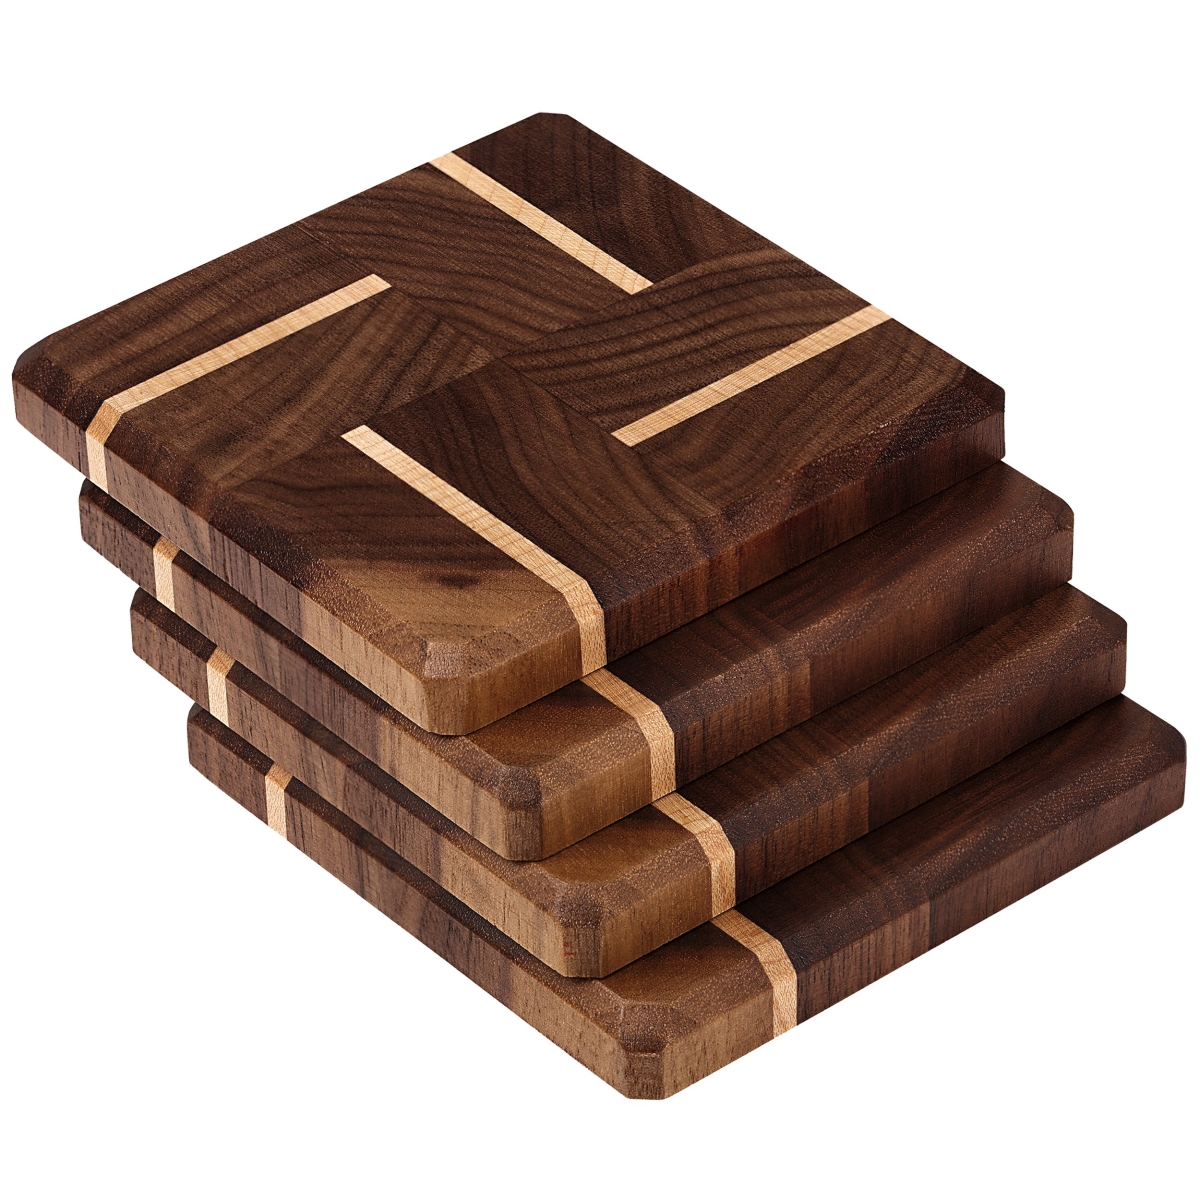 Picture of A & E Millwork AEM-5015 Walnut & Maple Wood Coasters End Grain - Set of 4